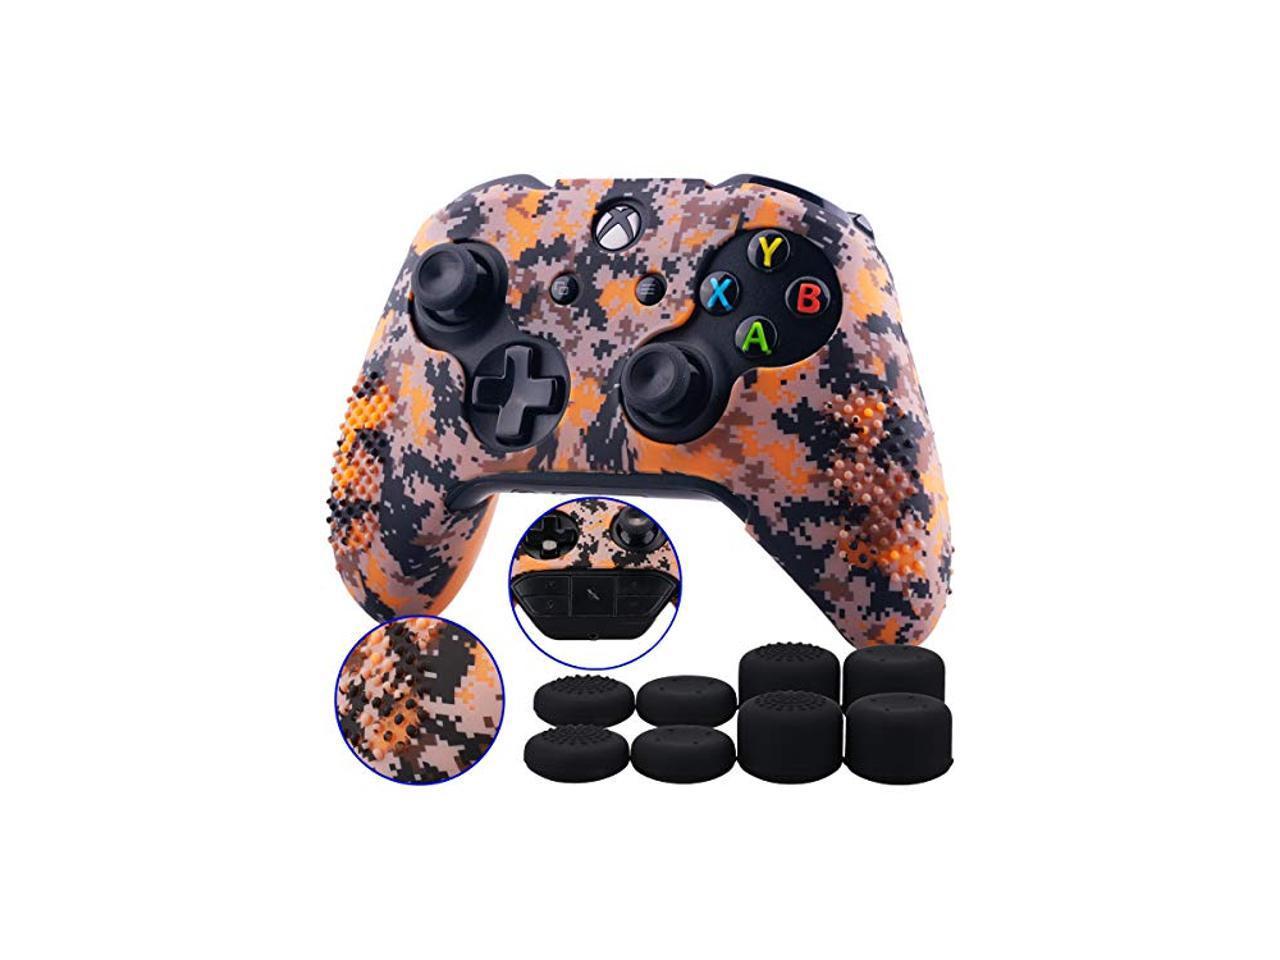 Xbox One Elite 9CDeer 1 x Protective Customize Transfer Print Silicone Cover Skin colour paint 6 Thumb Grips Analog Caps for Controller Compatible with Official Stereo Headset Adapter 